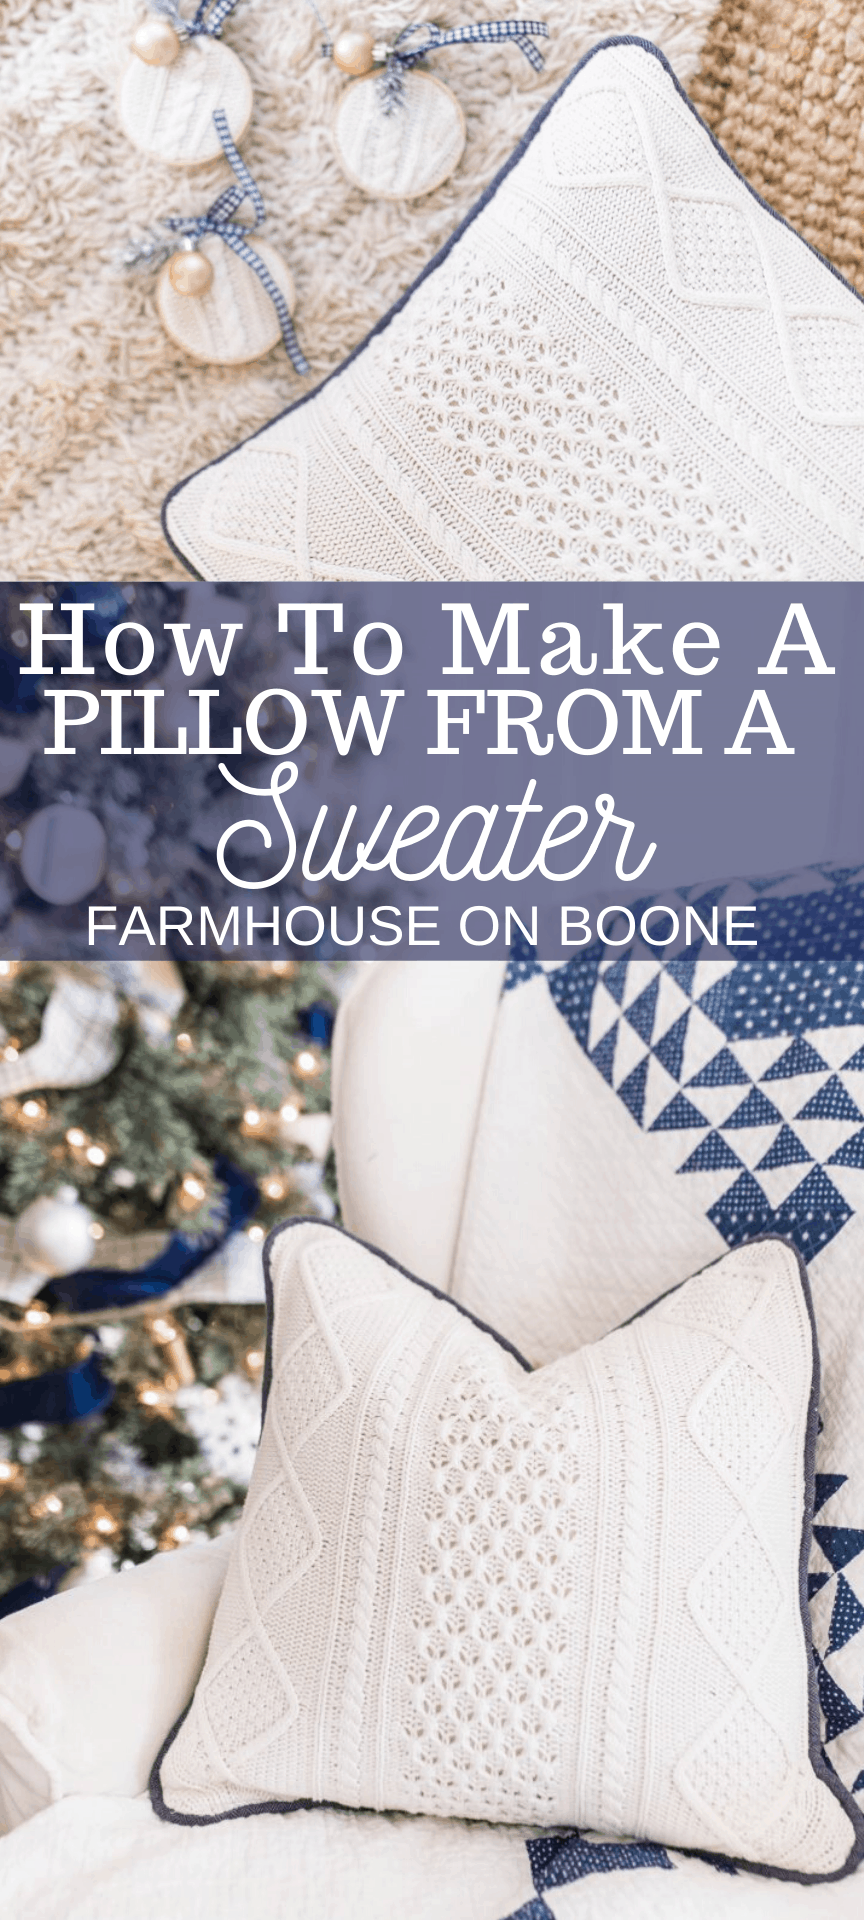 https://www.farmhouseonboone.com/wp-content/uploads/2019/11/How-To-Make-A-Pillow-From-A-Sweater.png